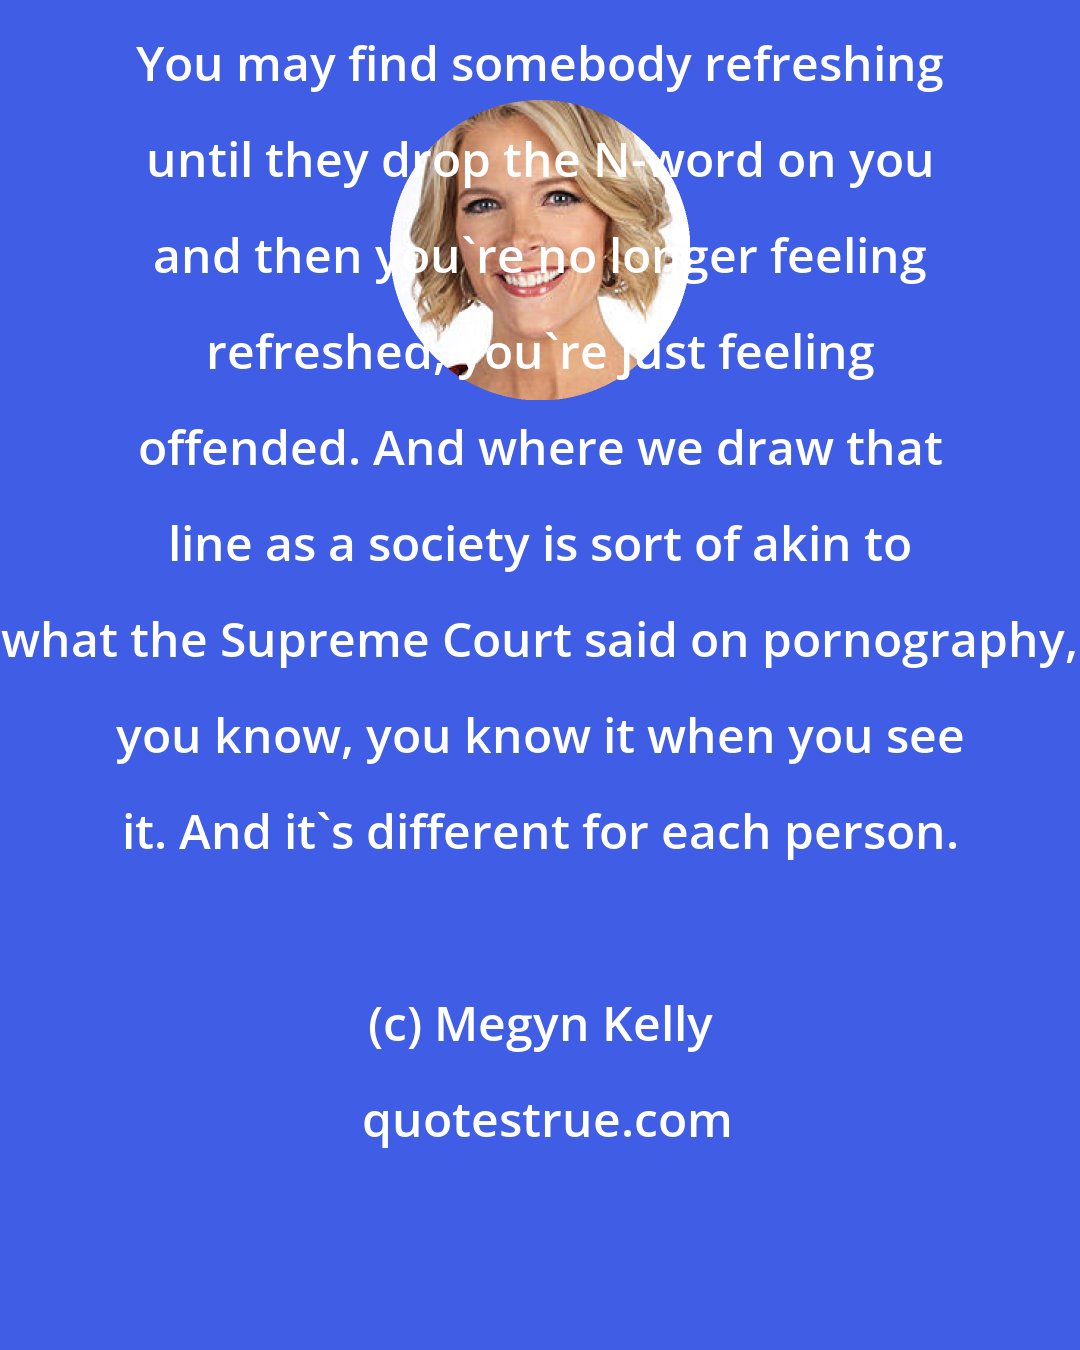 Megyn Kelly: You may find somebody refreshing until they drop the N-word on you and then you're no longer feeling refreshed, you're just feeling offended. And where we draw that line as a society is sort of akin to what the Supreme Court said on pornography, you know, you know it when you see it. And it's different for each person.